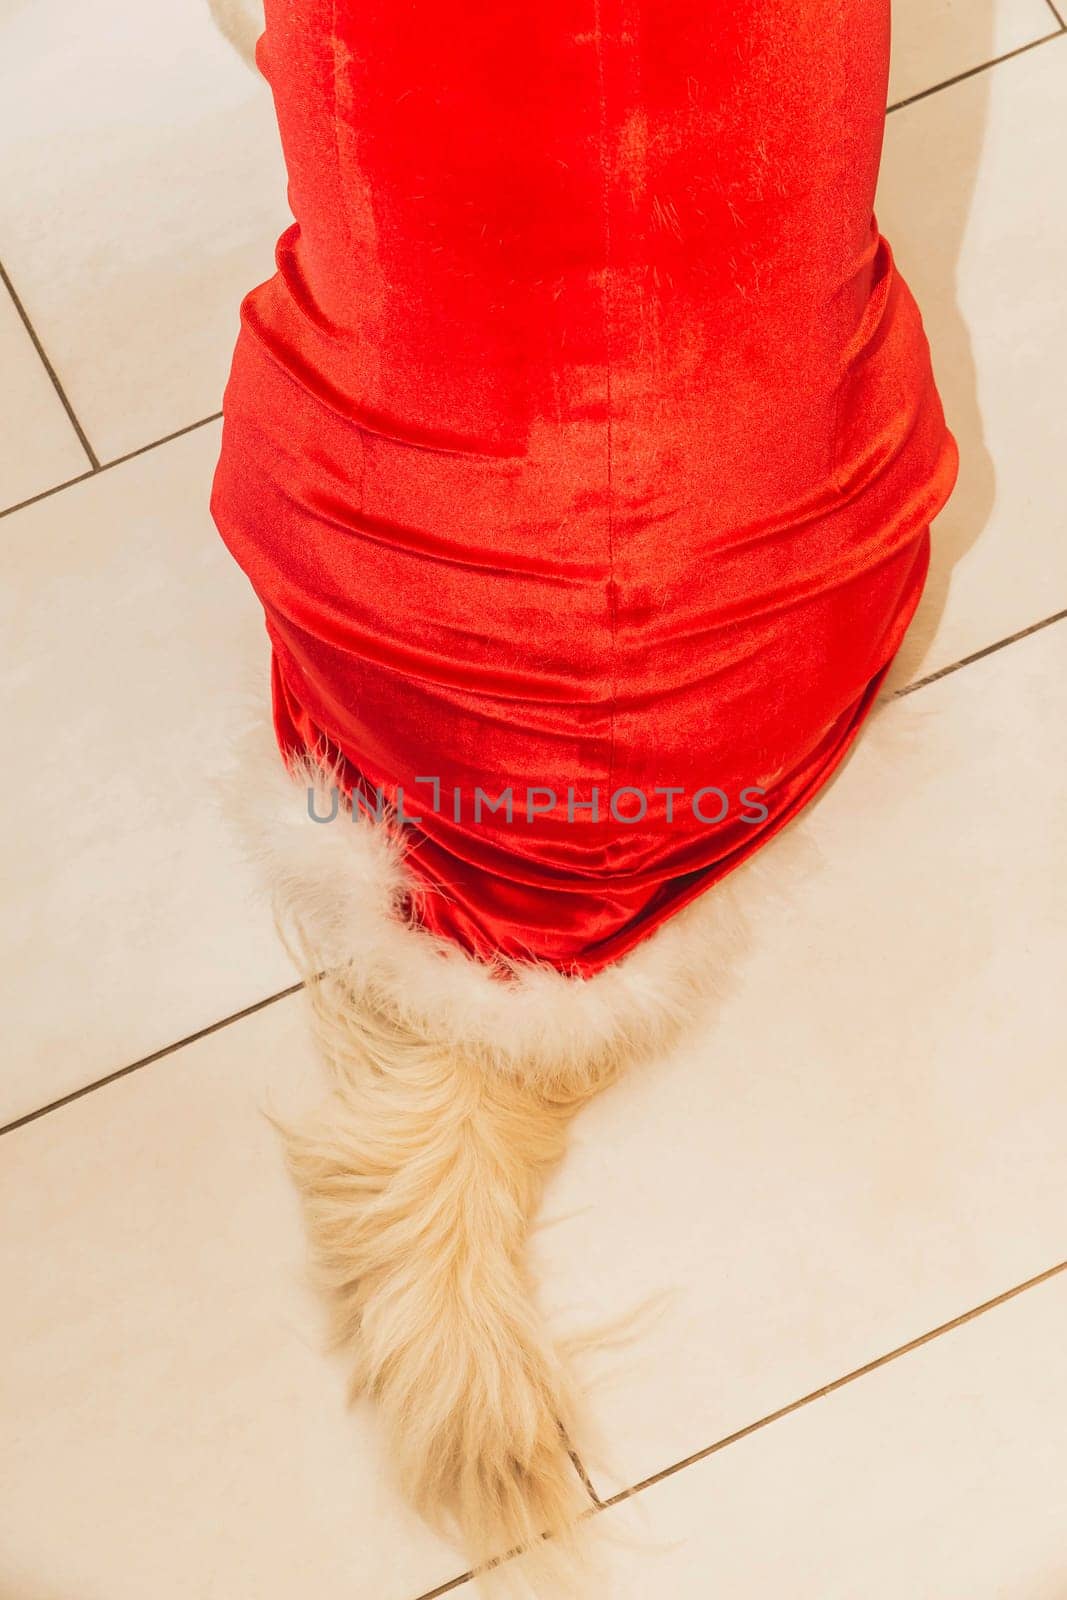 Tail of golden retriever in a red dress.